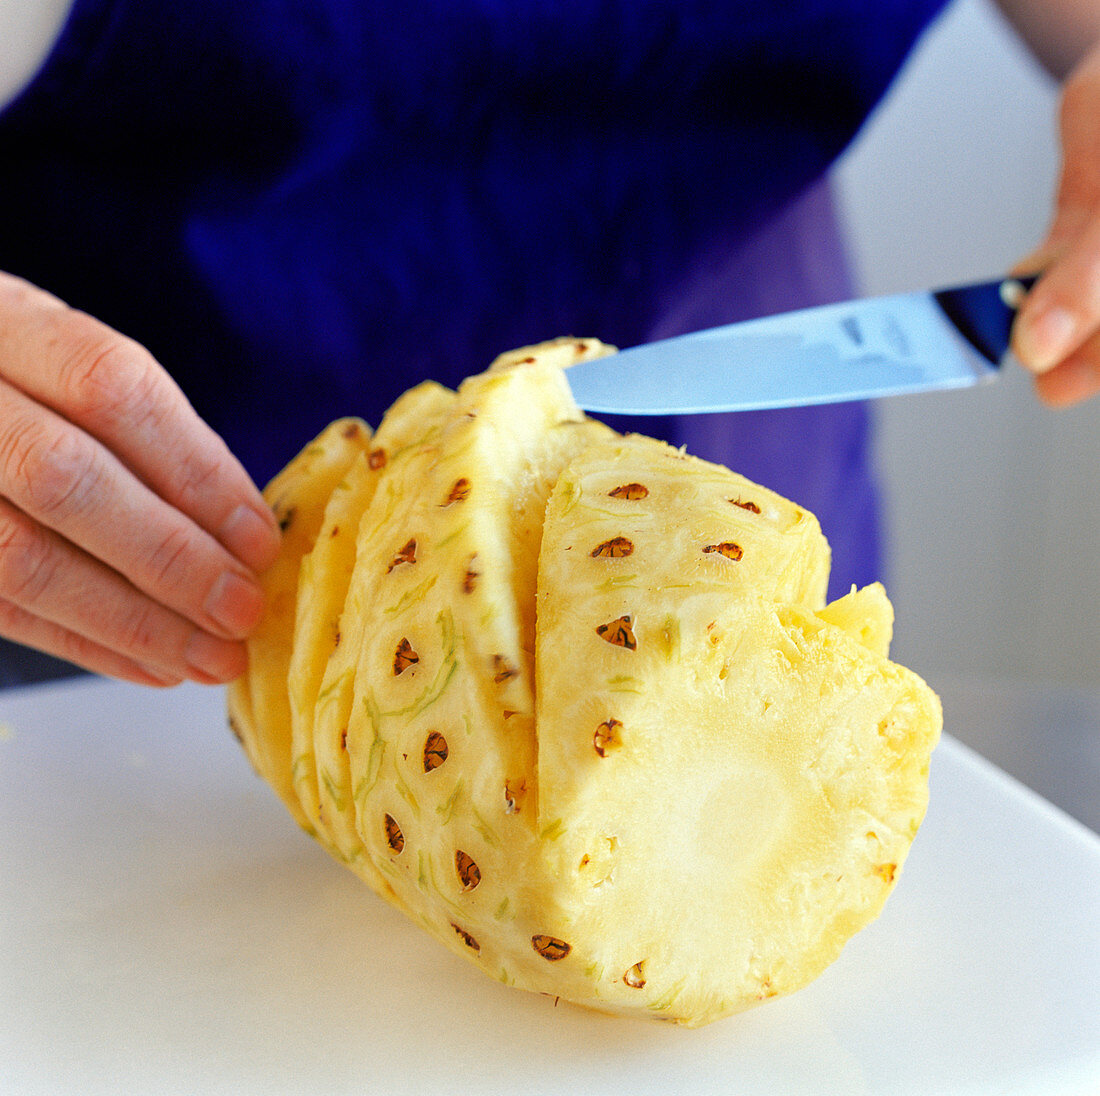 Slicing a pineapple